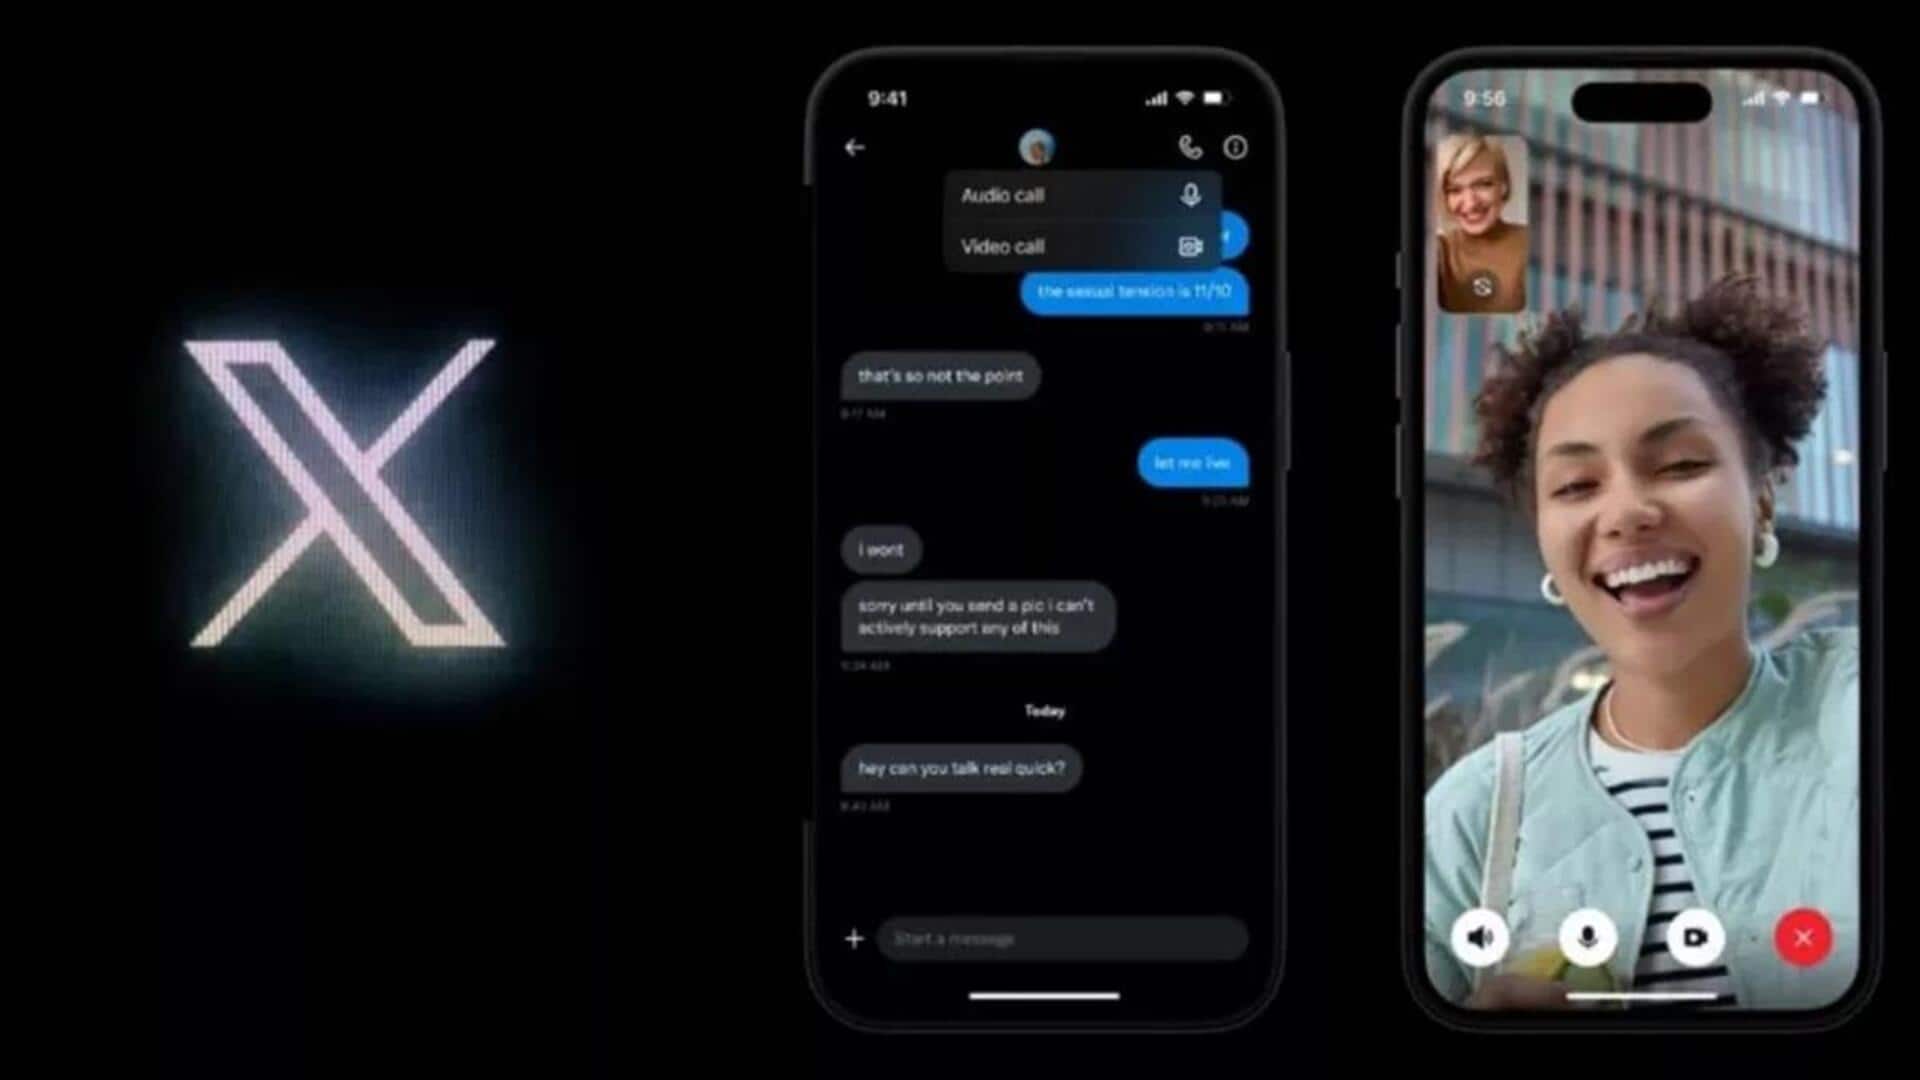 X introduces audio, video calls for Android users